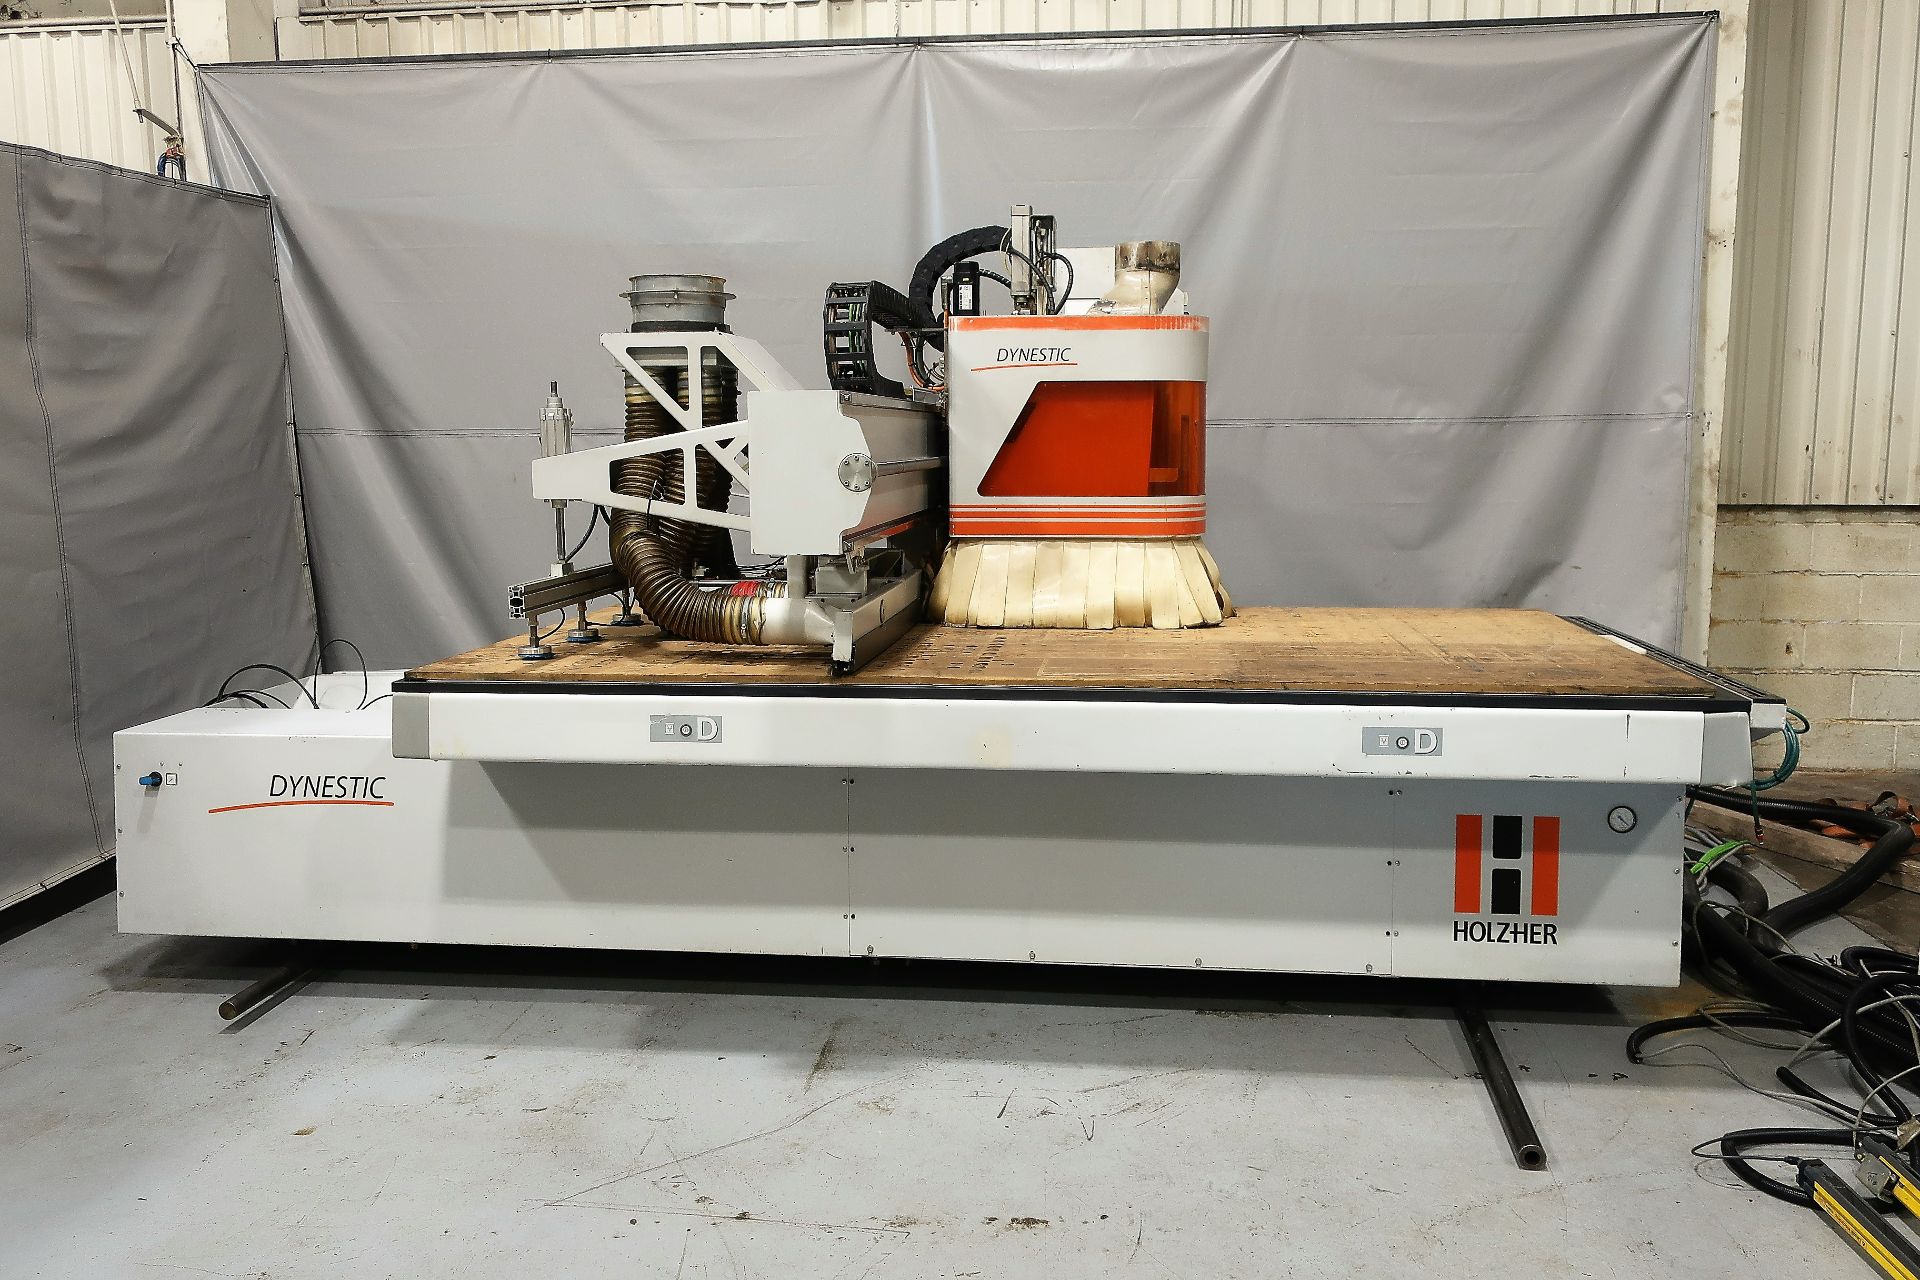 Holzher Model Dynestic 7516 5'x10' CNC Router, S/N 27/1-102, New 2011 - Image 3 of 12